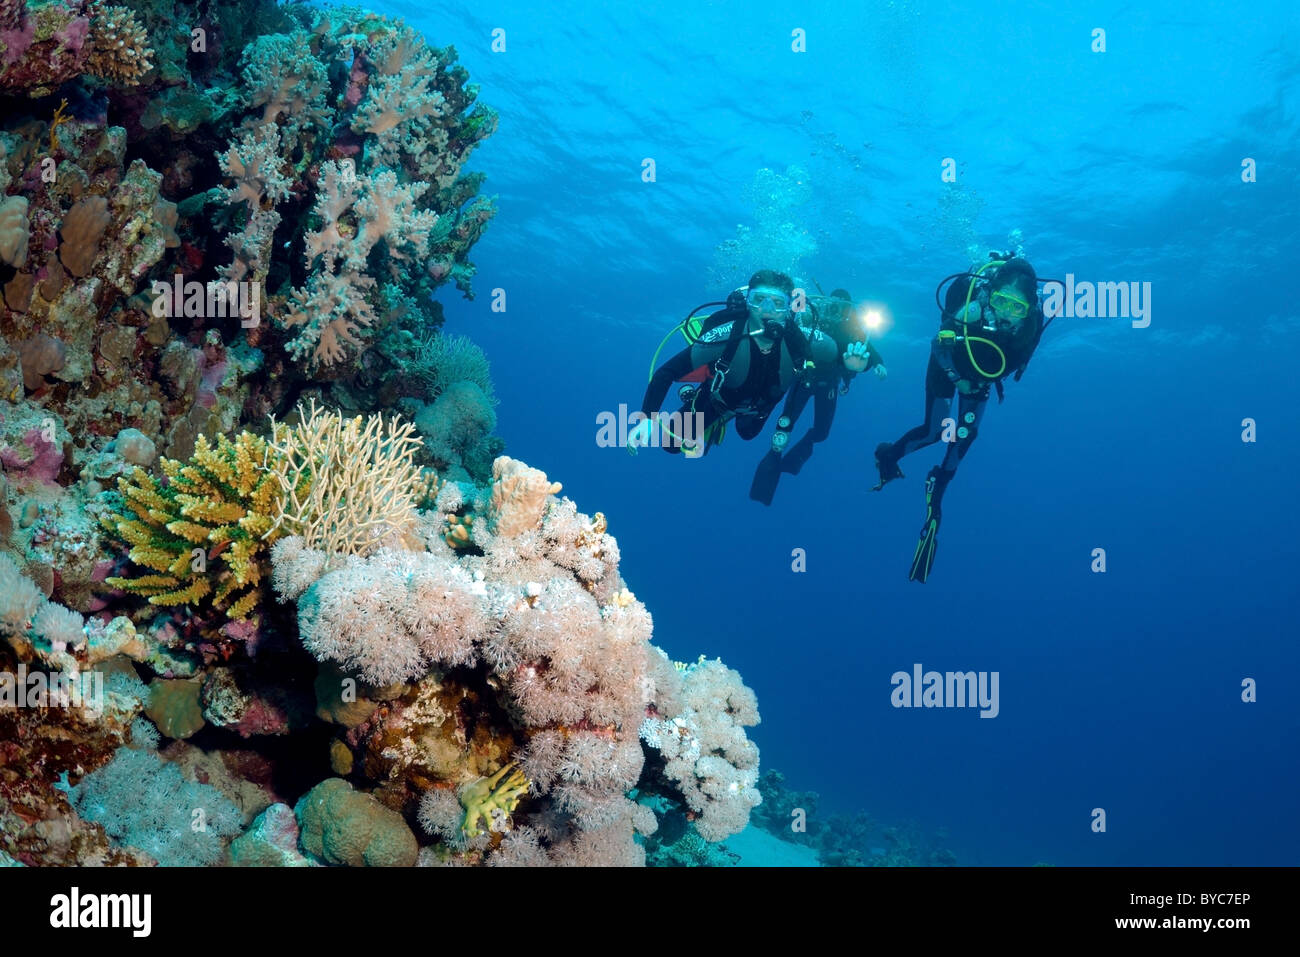 Scuba diver swim in the blue water abd look at on beautiful coral reef Stock Photo